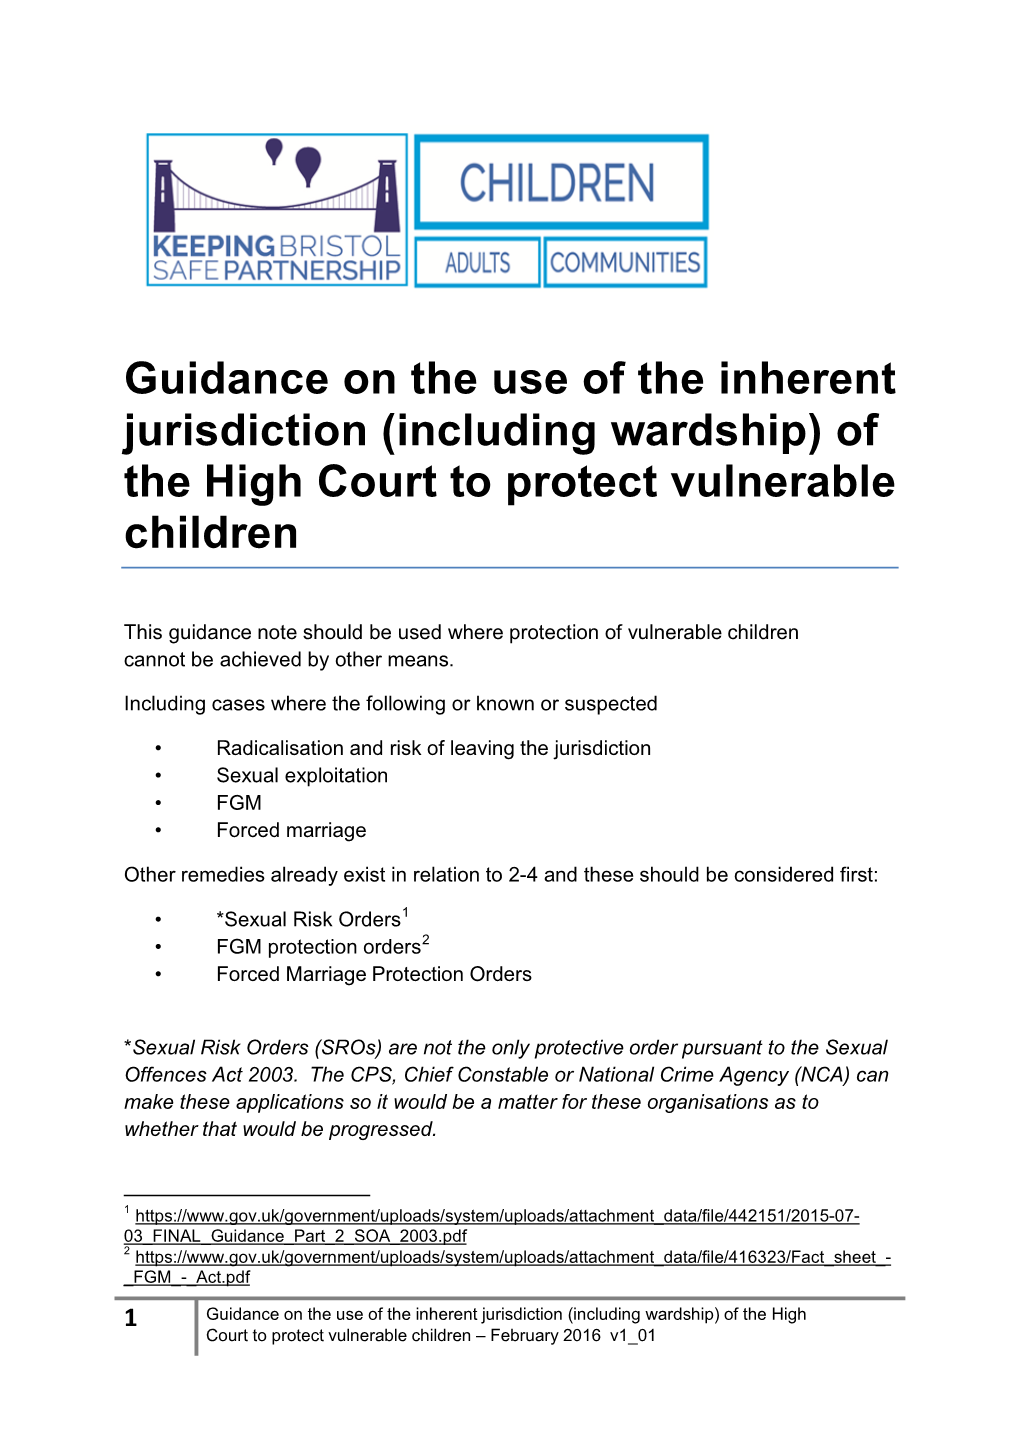 Guidance on the Use of the Inherent Jurisdiction (Including Wardship) of the High Court to Protect Vulnerable Children